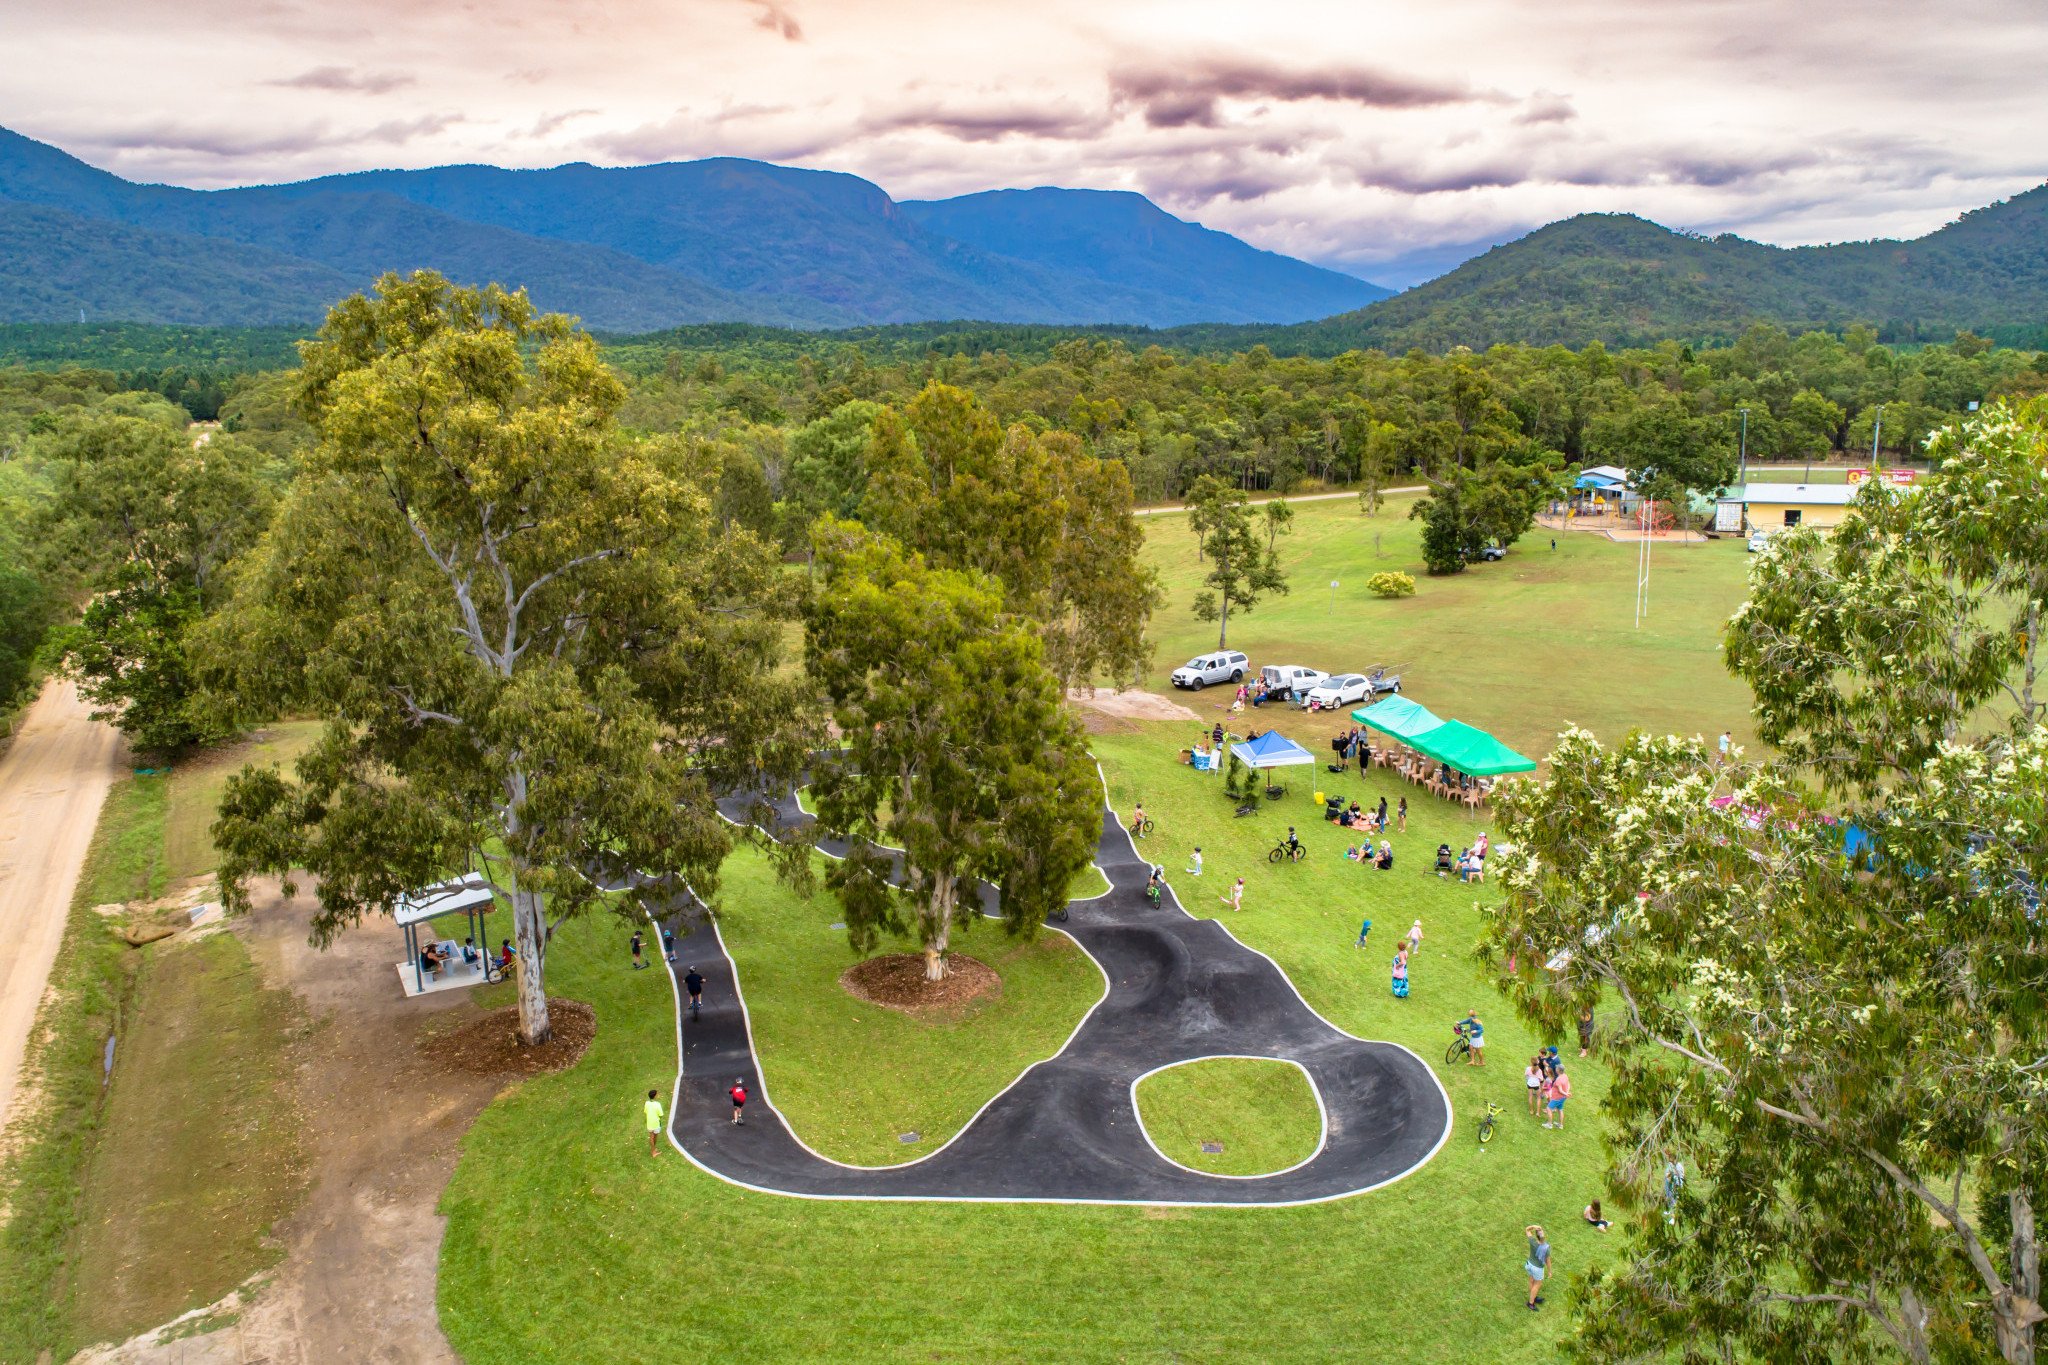 Pump track opening - feature photo